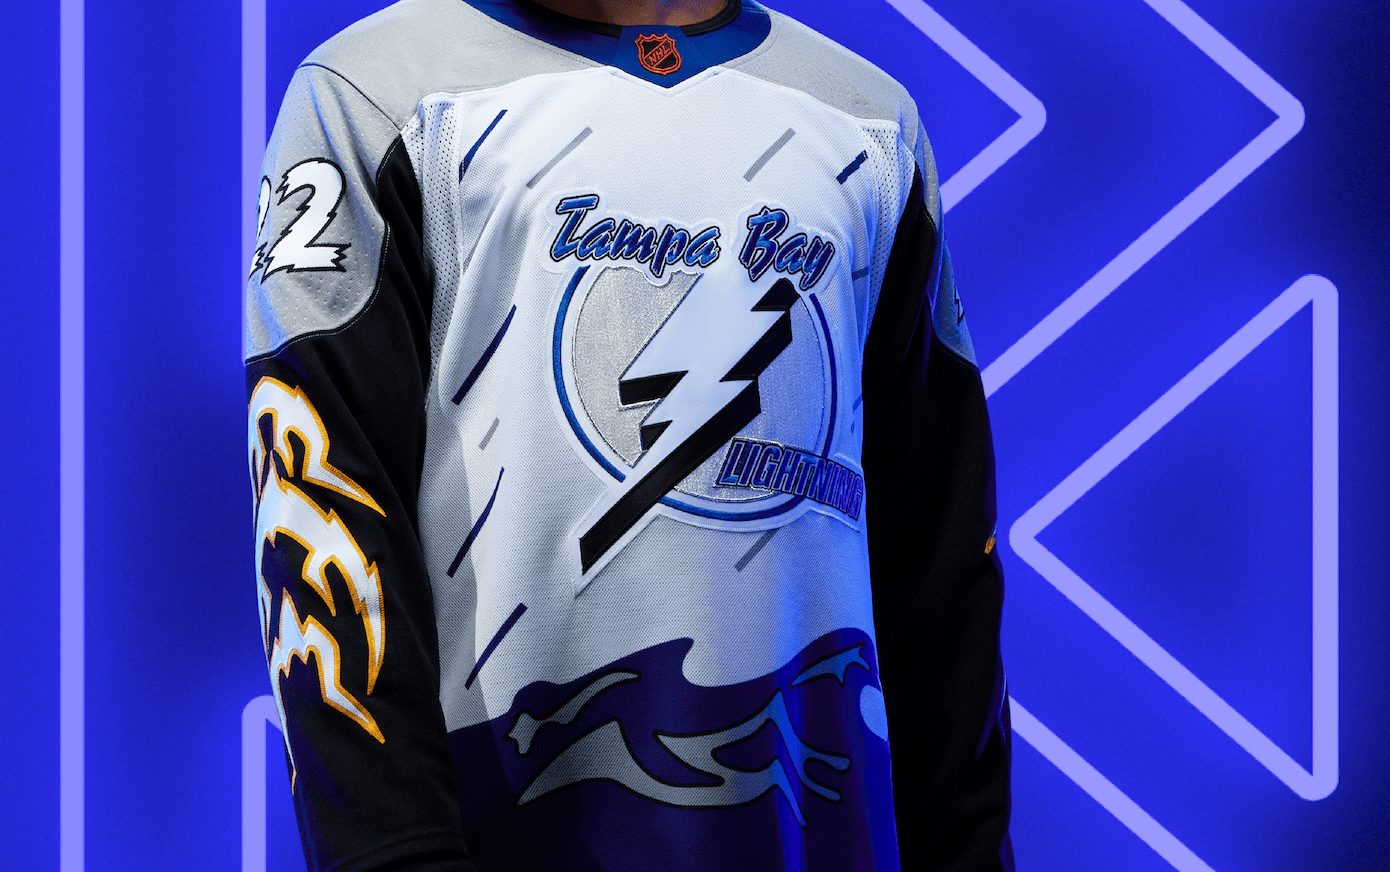 Our explorations start in authenticity and Tampa Bay embraced this nostalgic design wholeheartedly. They really recognized that these jerseys represent a moment in time and they decided to shoot for the moon. It’s a risk, but it’s one I admire. I think it’s going to be popular.